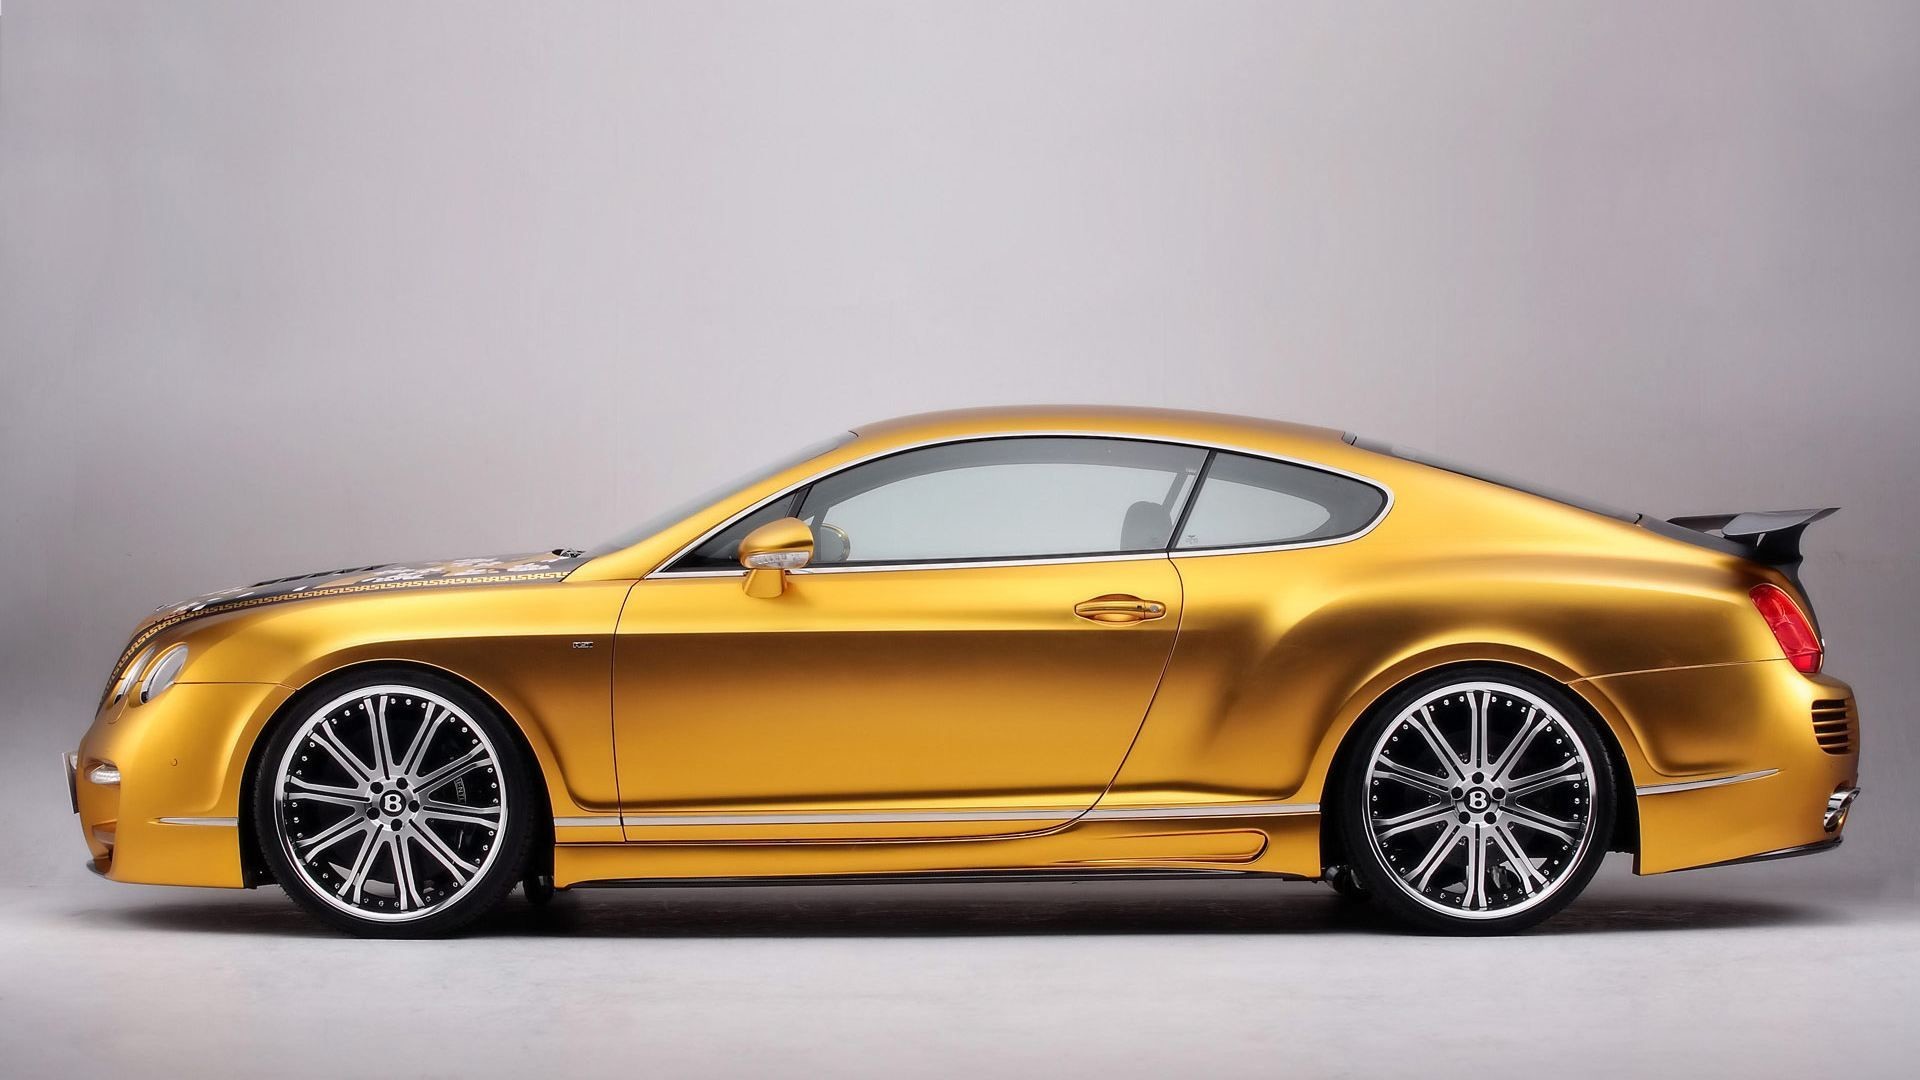 JNH718 – Cool Gold Cars Wallpapers, New Gold Cars HD Wallpapers